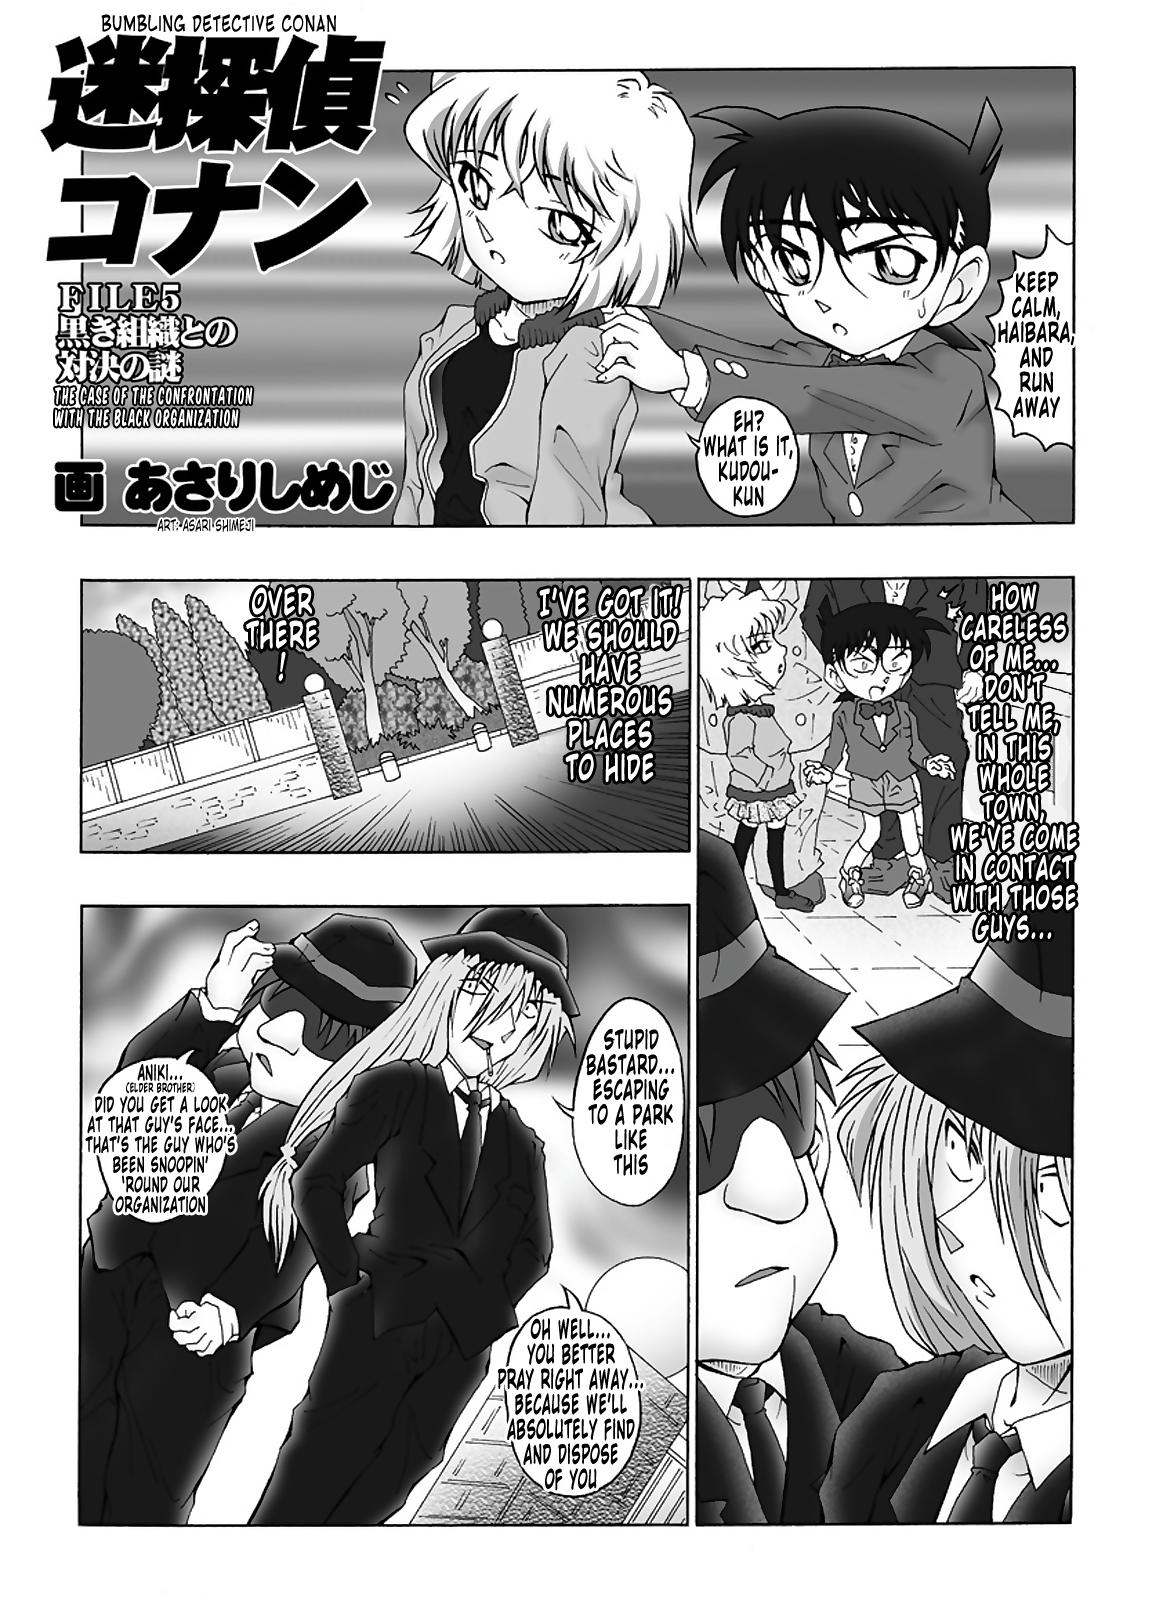 Pareja Bumbling Detective Conan - File 5: The Case of The Confrontation with The Black Organiztion - Detective conan Best Blowjob Ever - Page 4